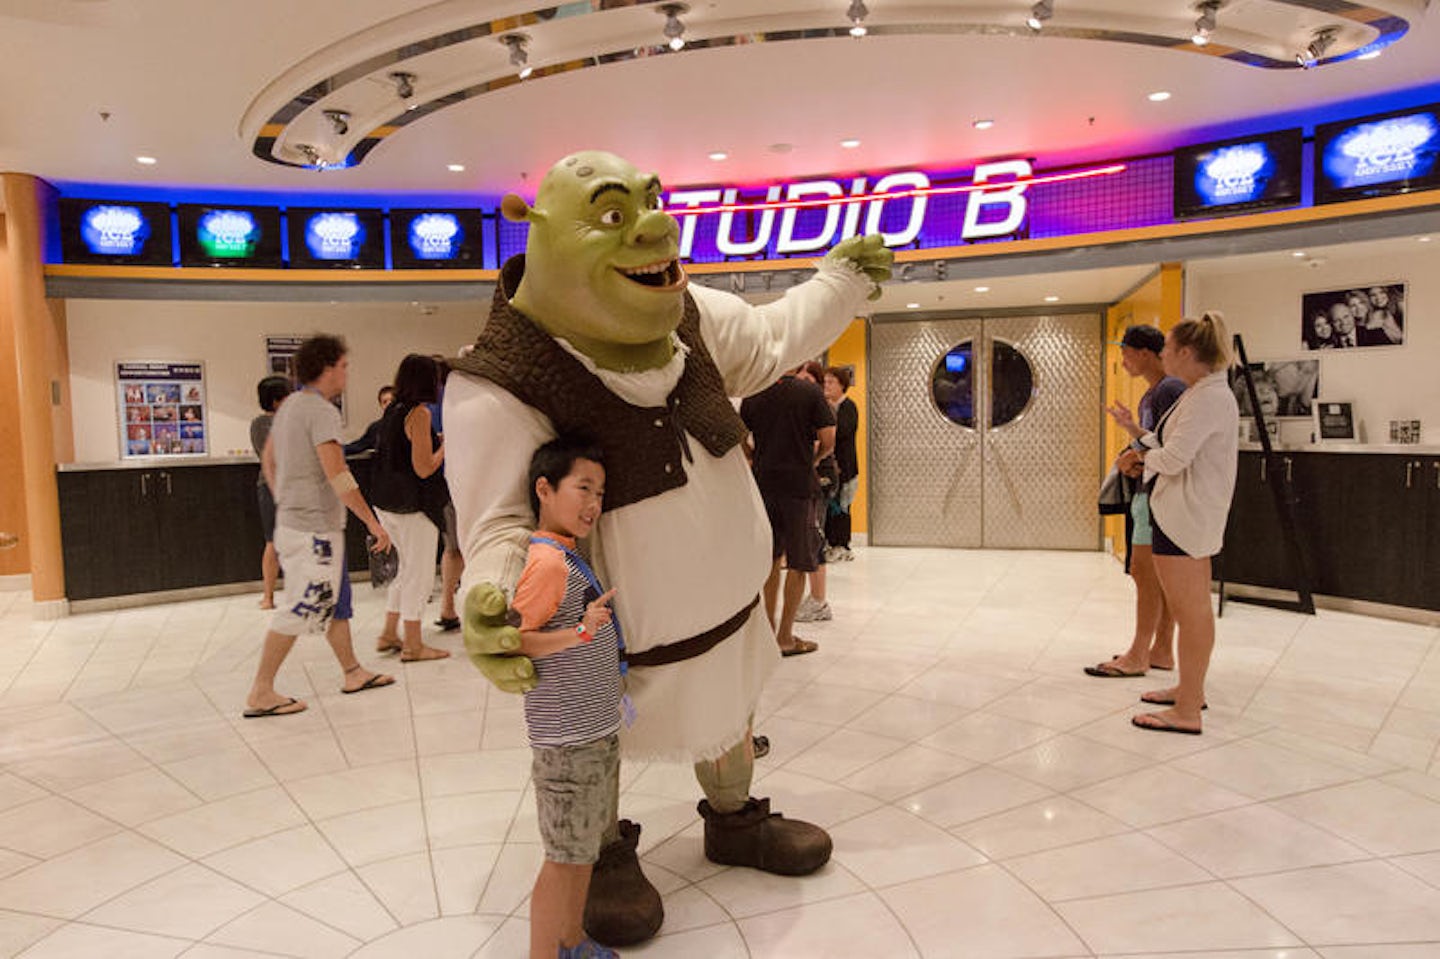 DreamWorks Experience on Voyager of the Seas